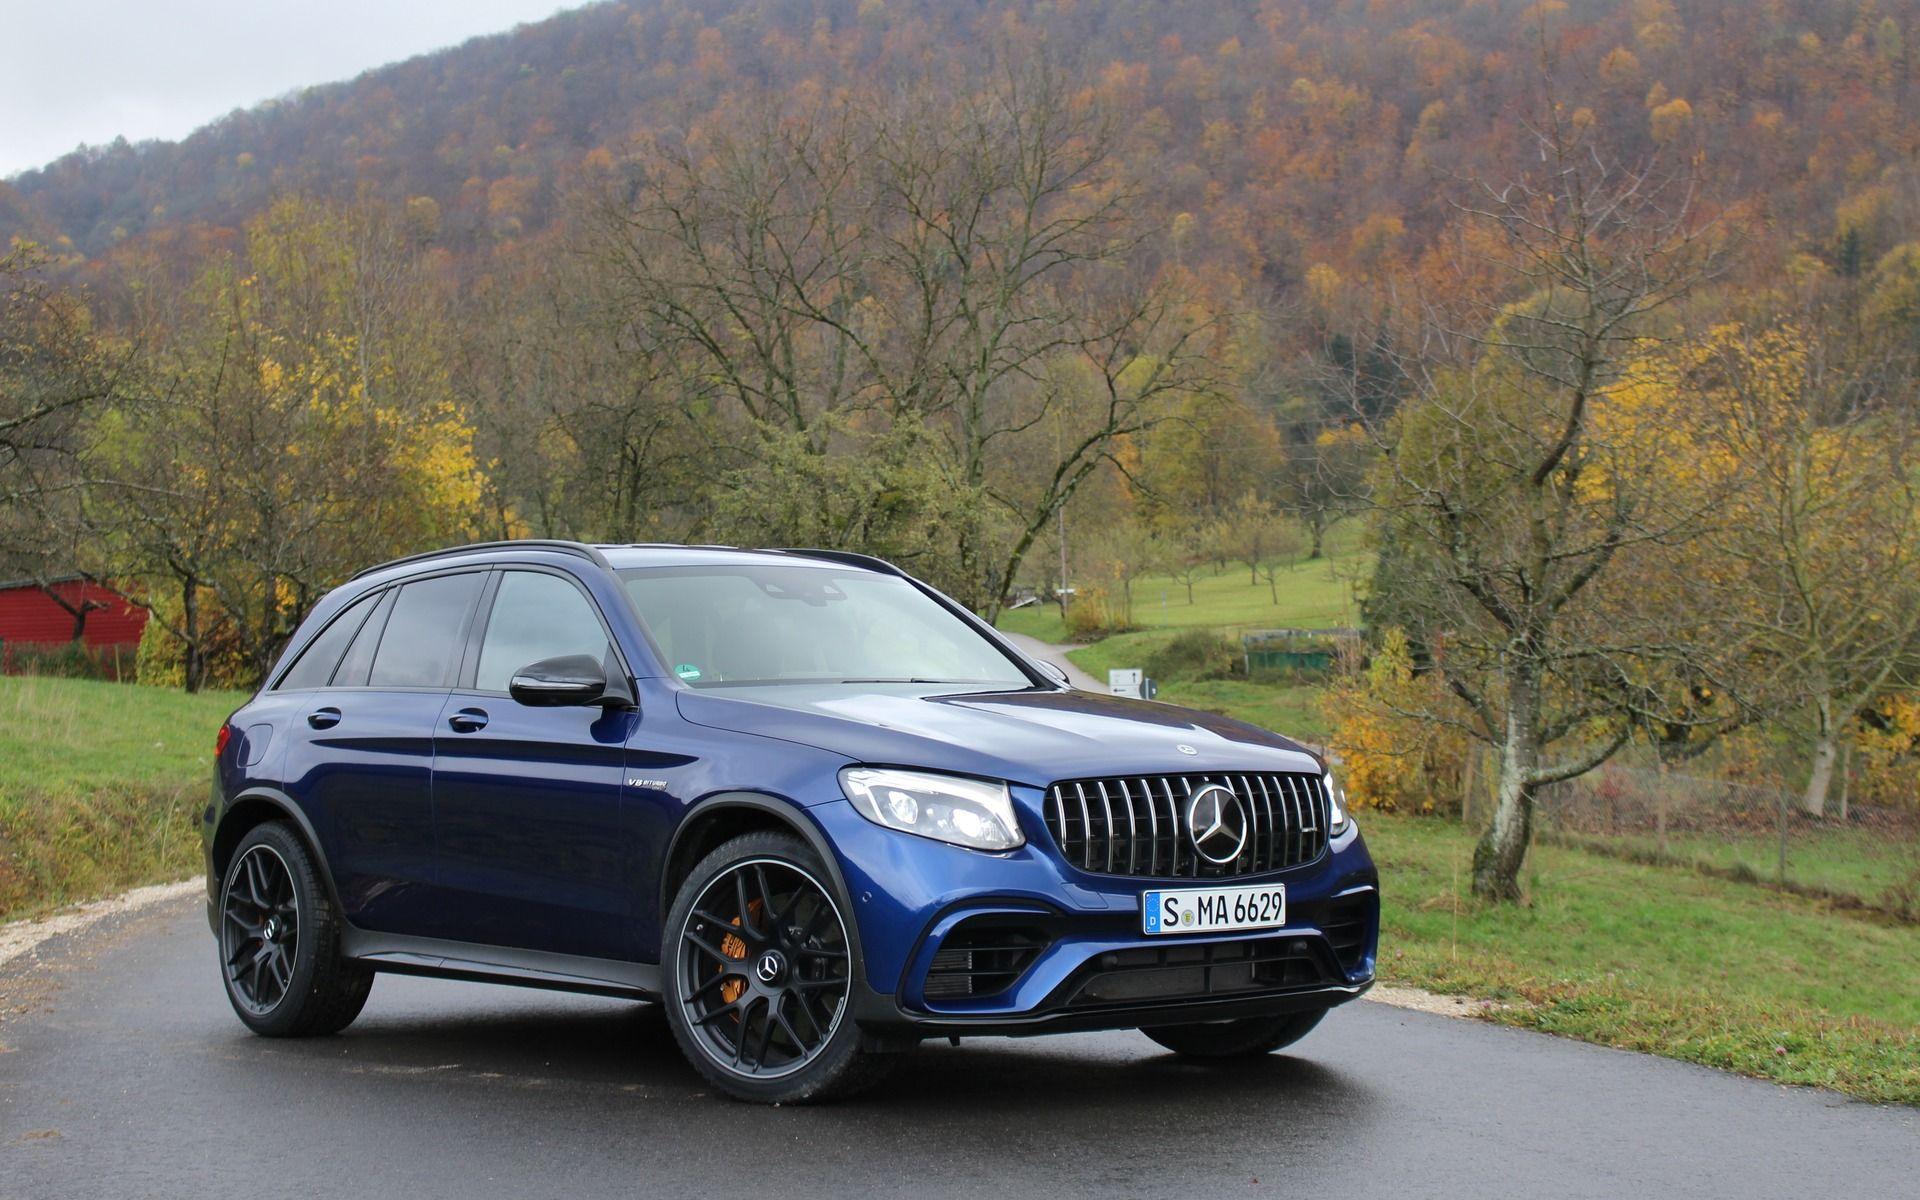 Mercedes AMG GLC 63 S 4MATIC+: The Family Missile